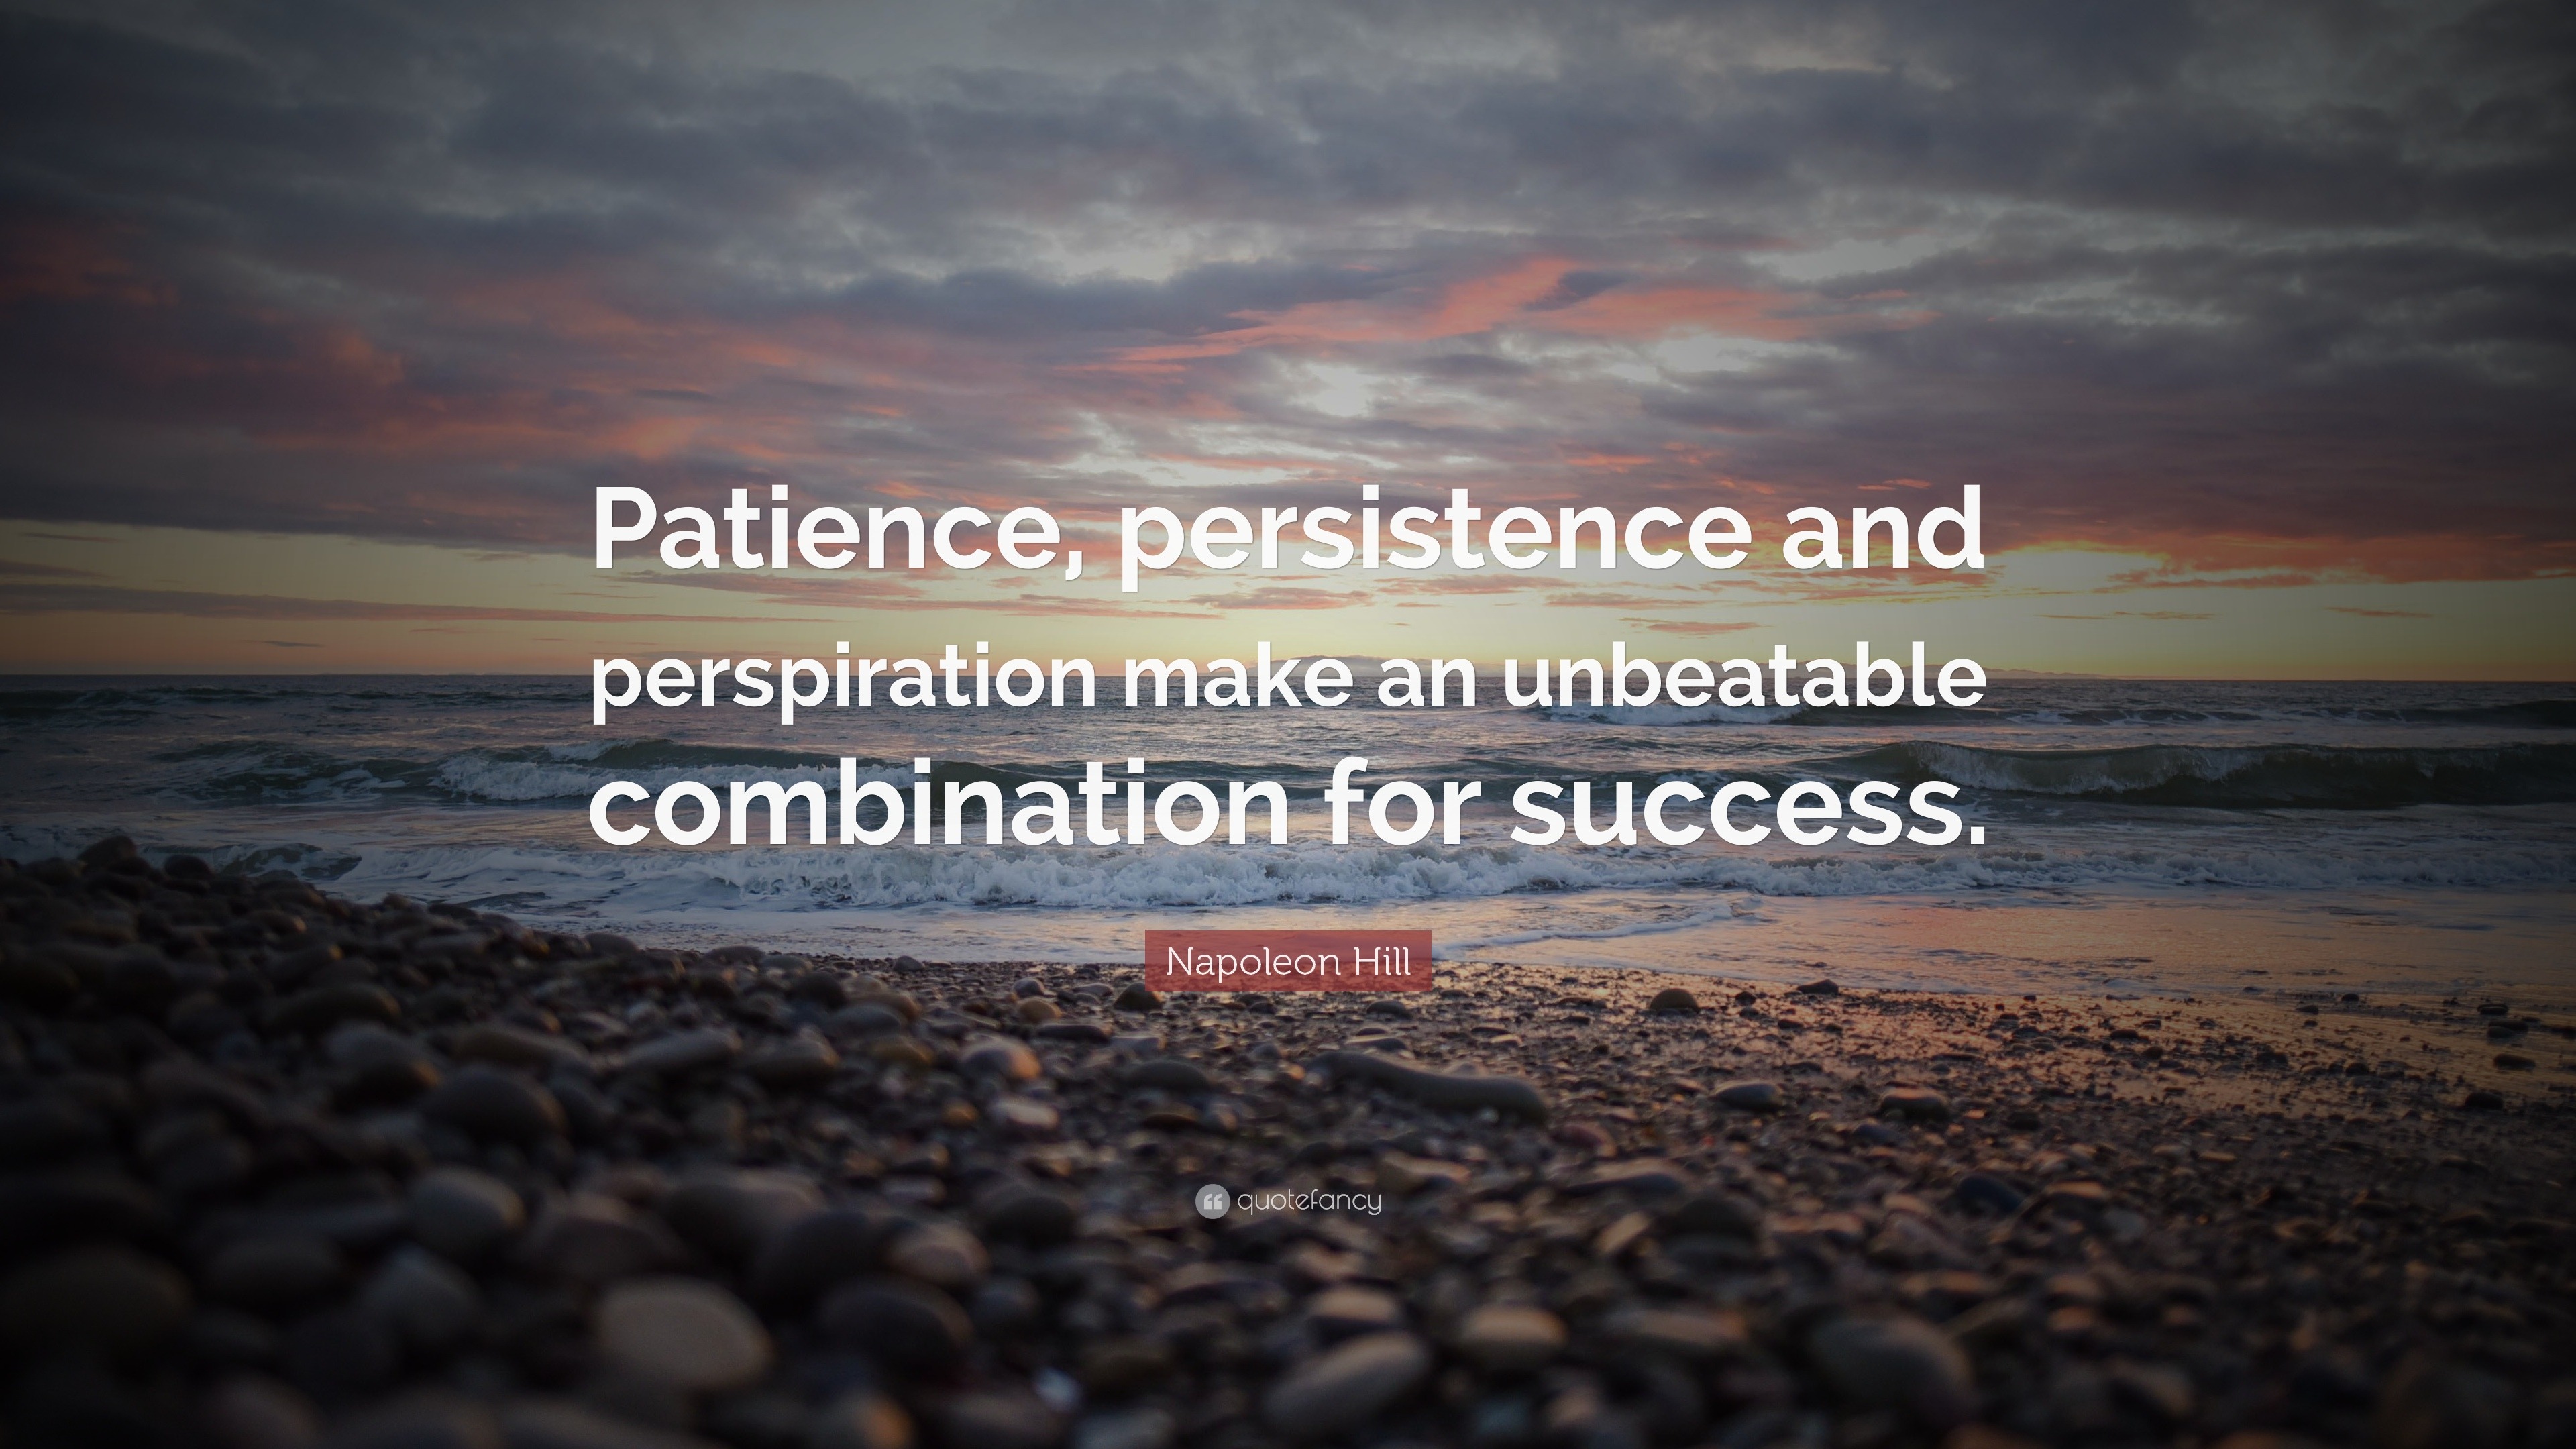 Napoleon Hill Quote: “Patience, persistence and perspiration make an